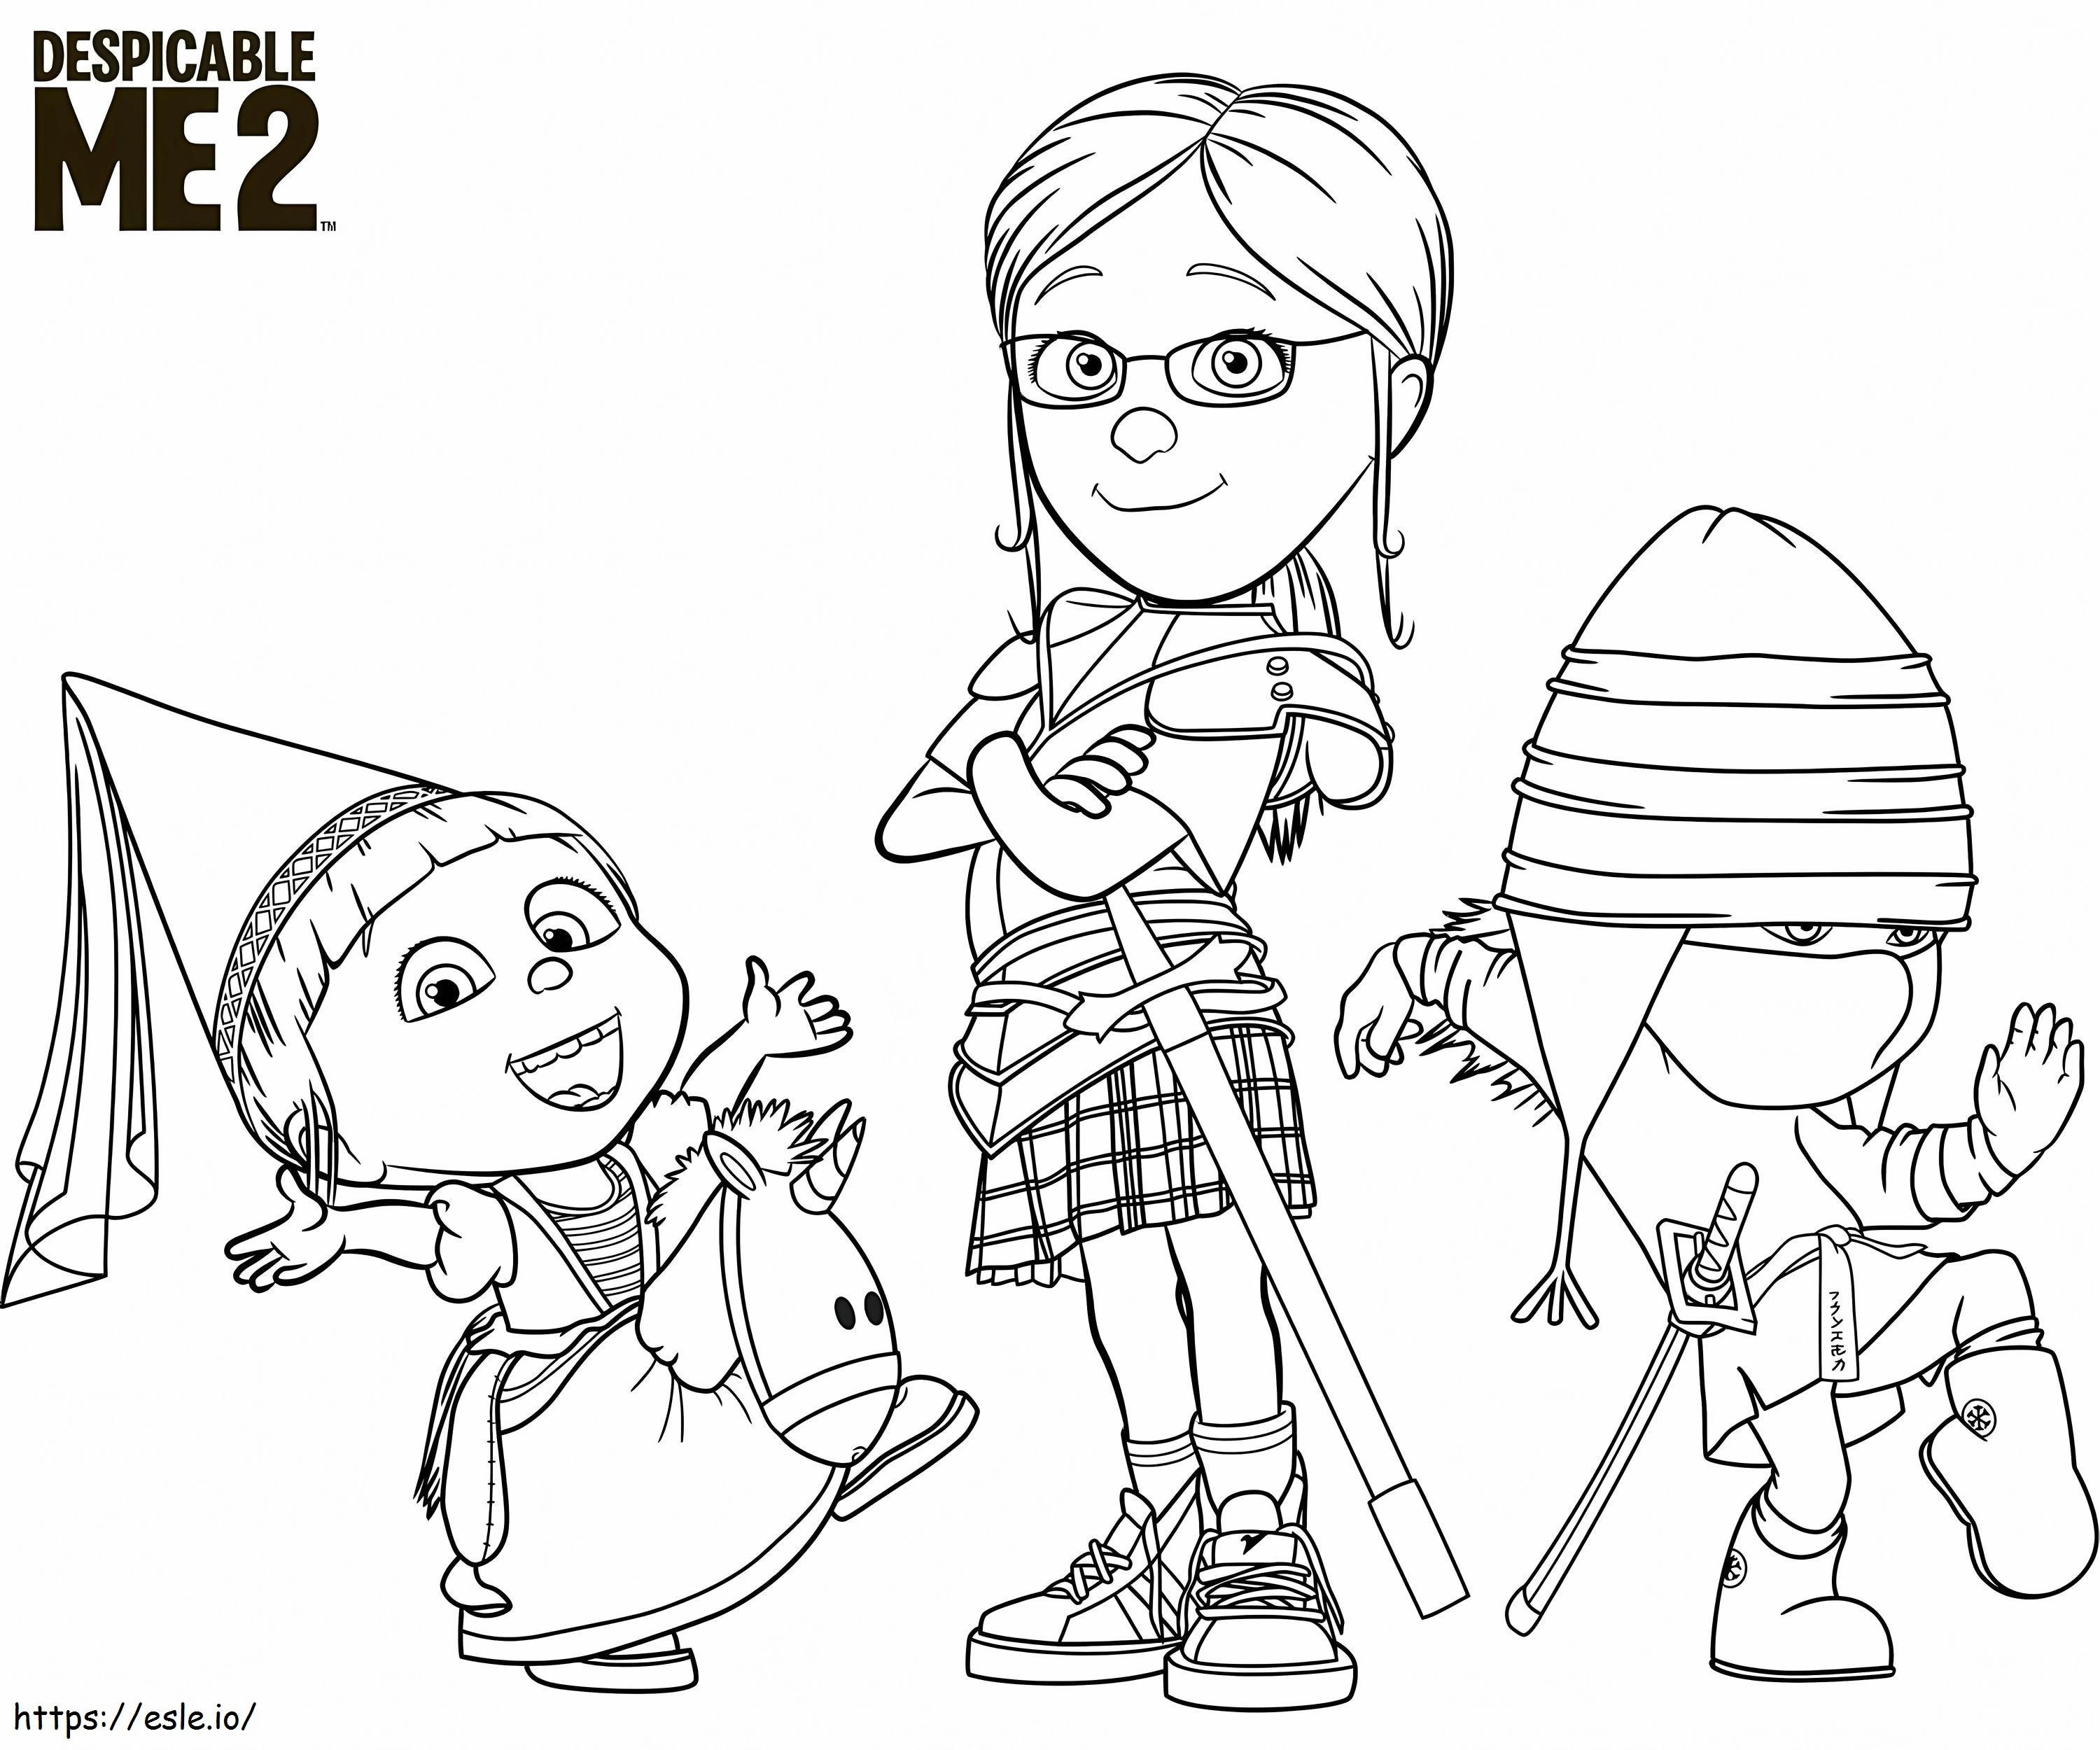 Kids From Despicable Me 2 coloring page